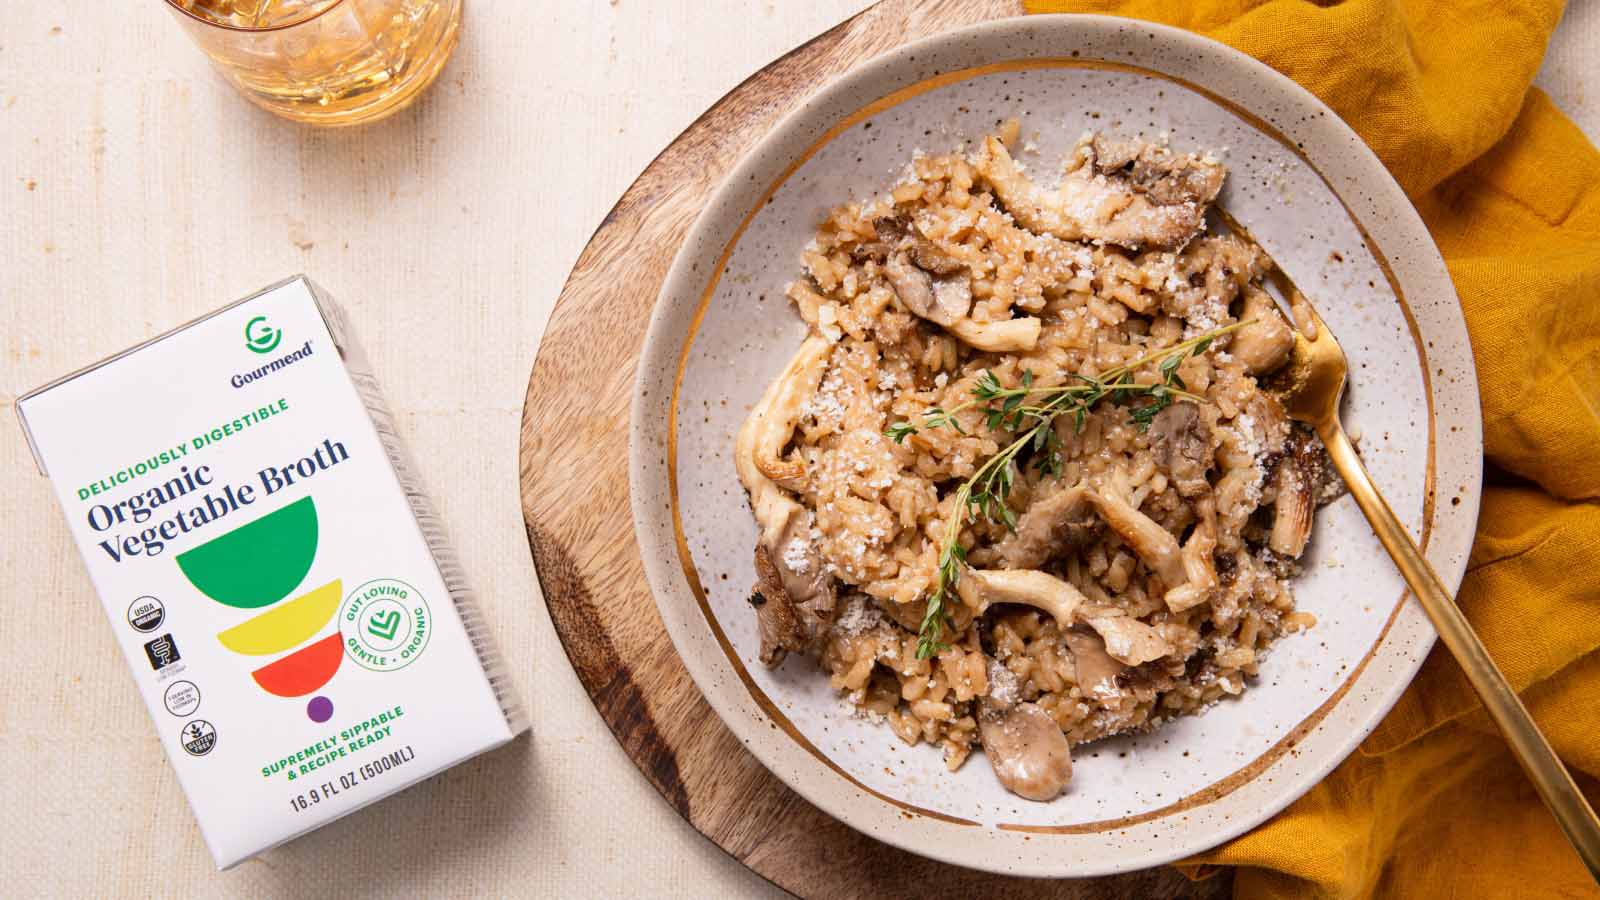 Gourmend recipe for Low FODMAP Mushroom Risotto 